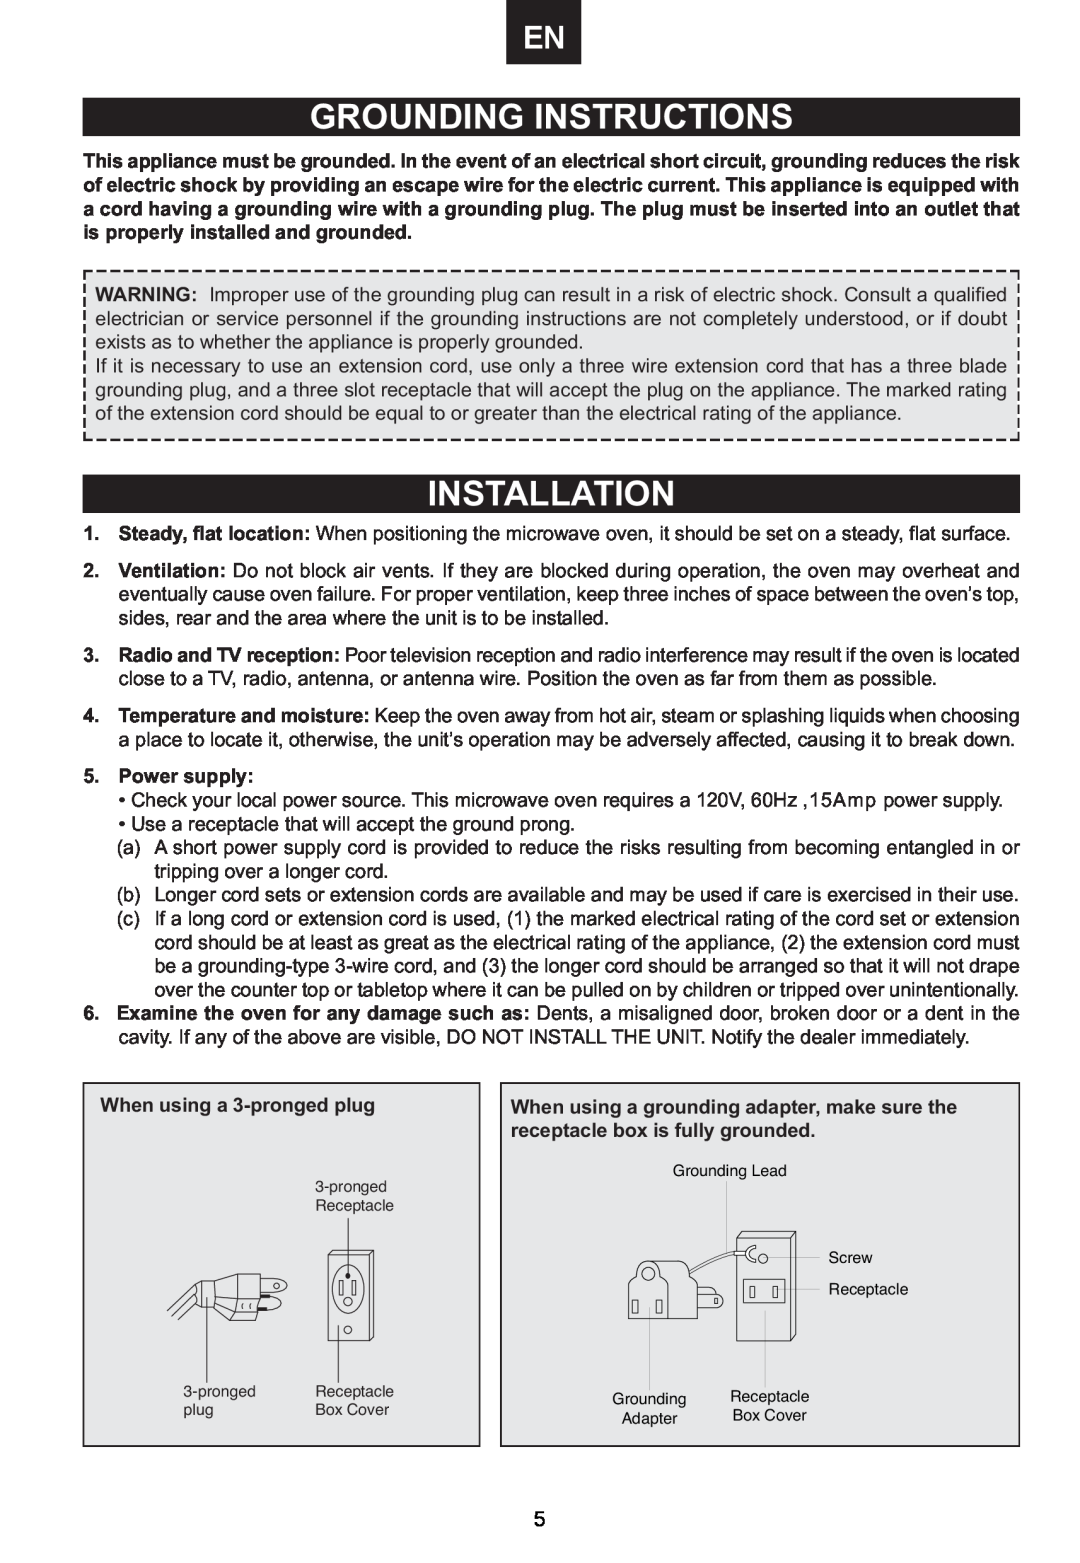 Emerson MWCG1584SB owner manual Grounding Instructions, Installation, Power supply, When using a 3-pronged plug 